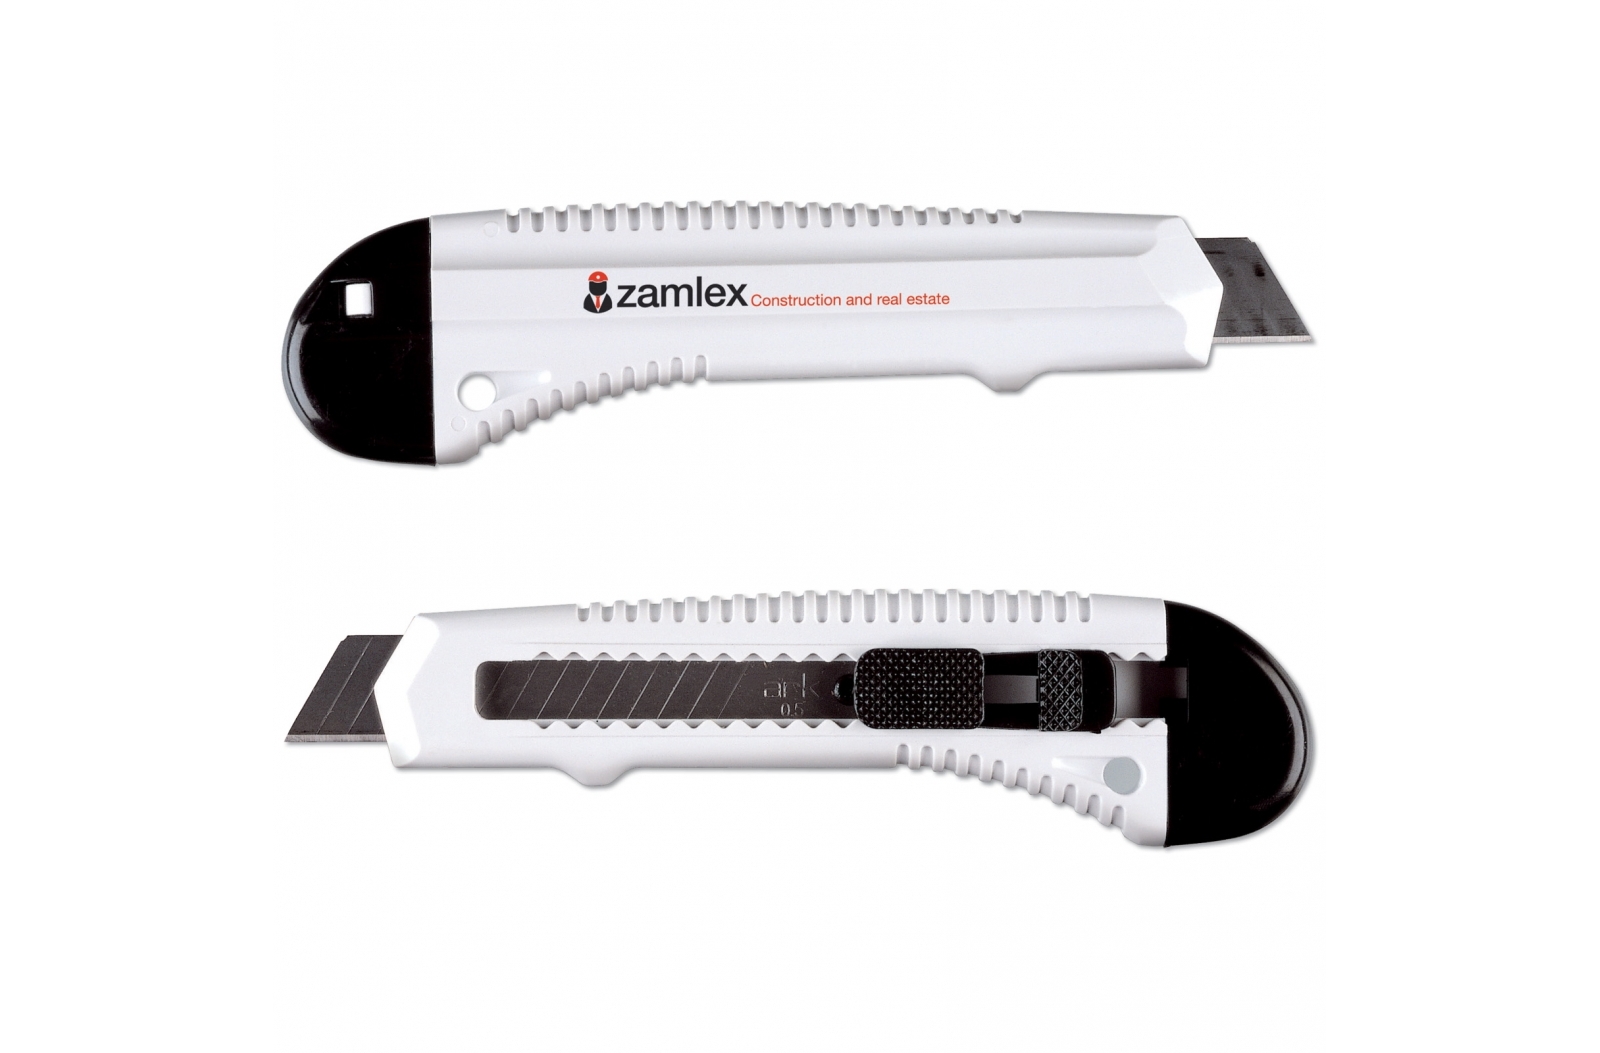 XXL Hobby Knife with 14 Snap-Off Blades - West Liss